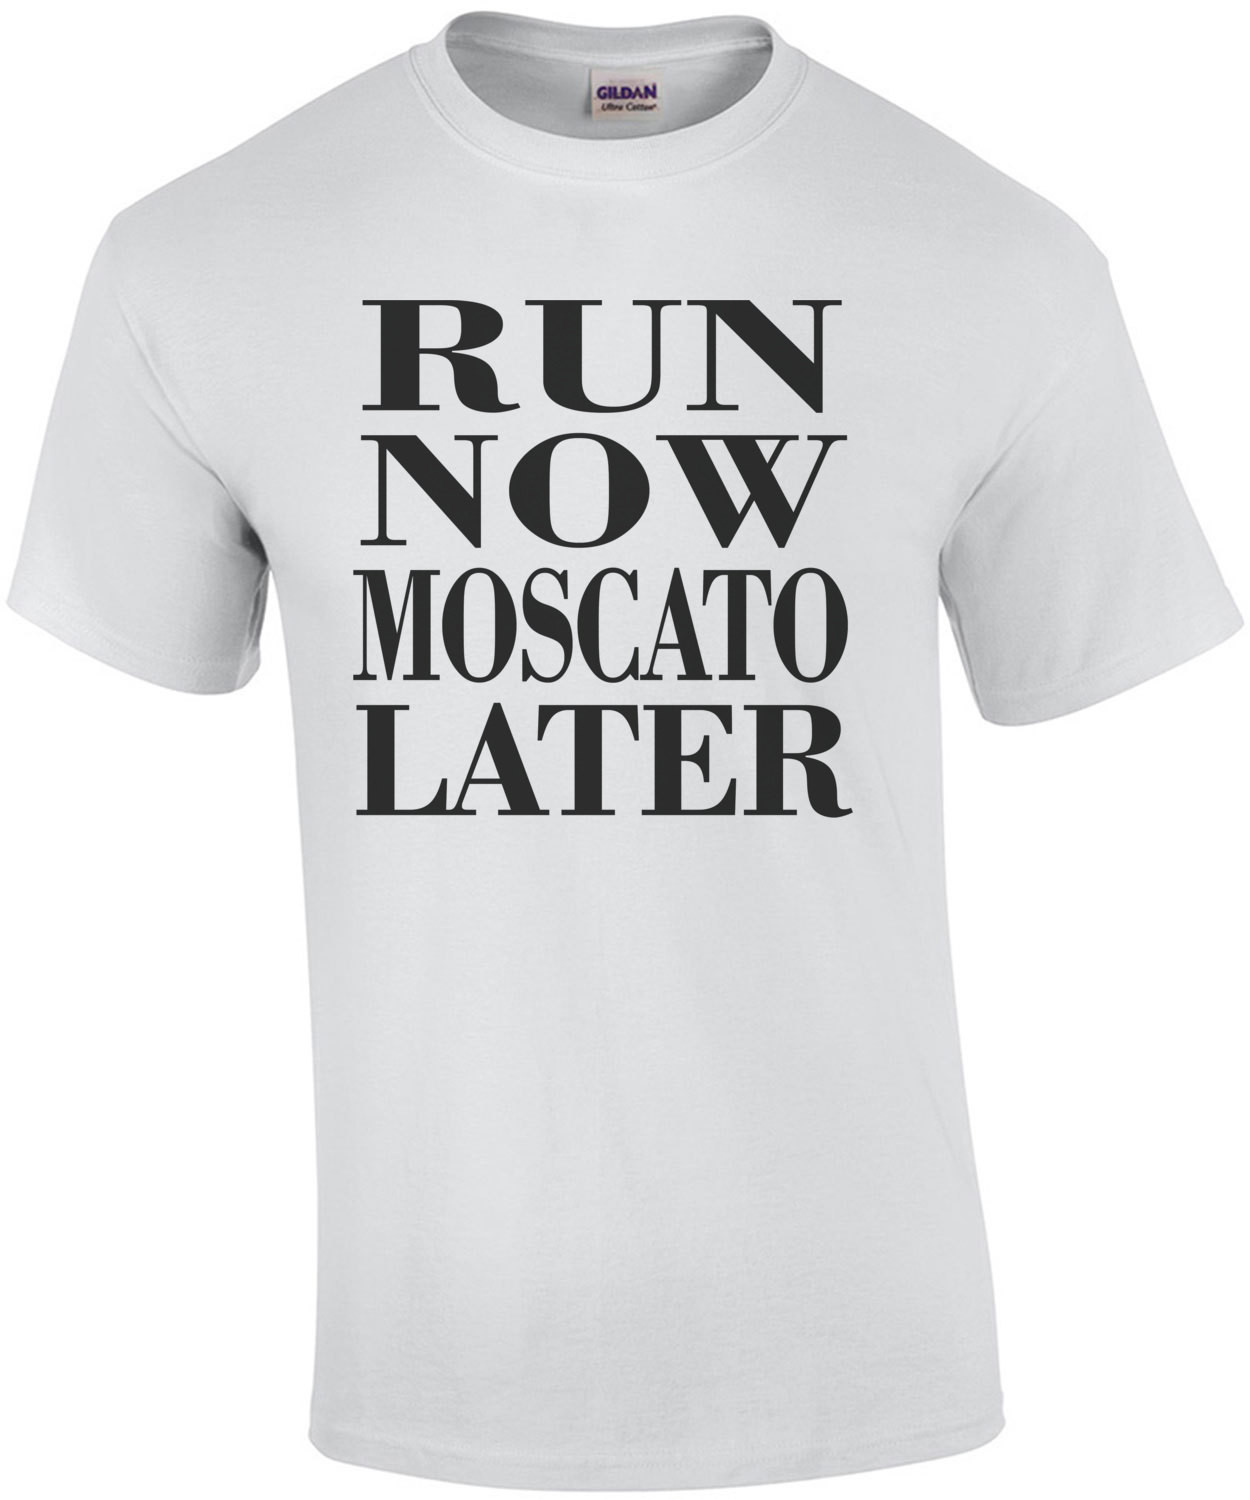 Run Now Moscato Later T-Shirt